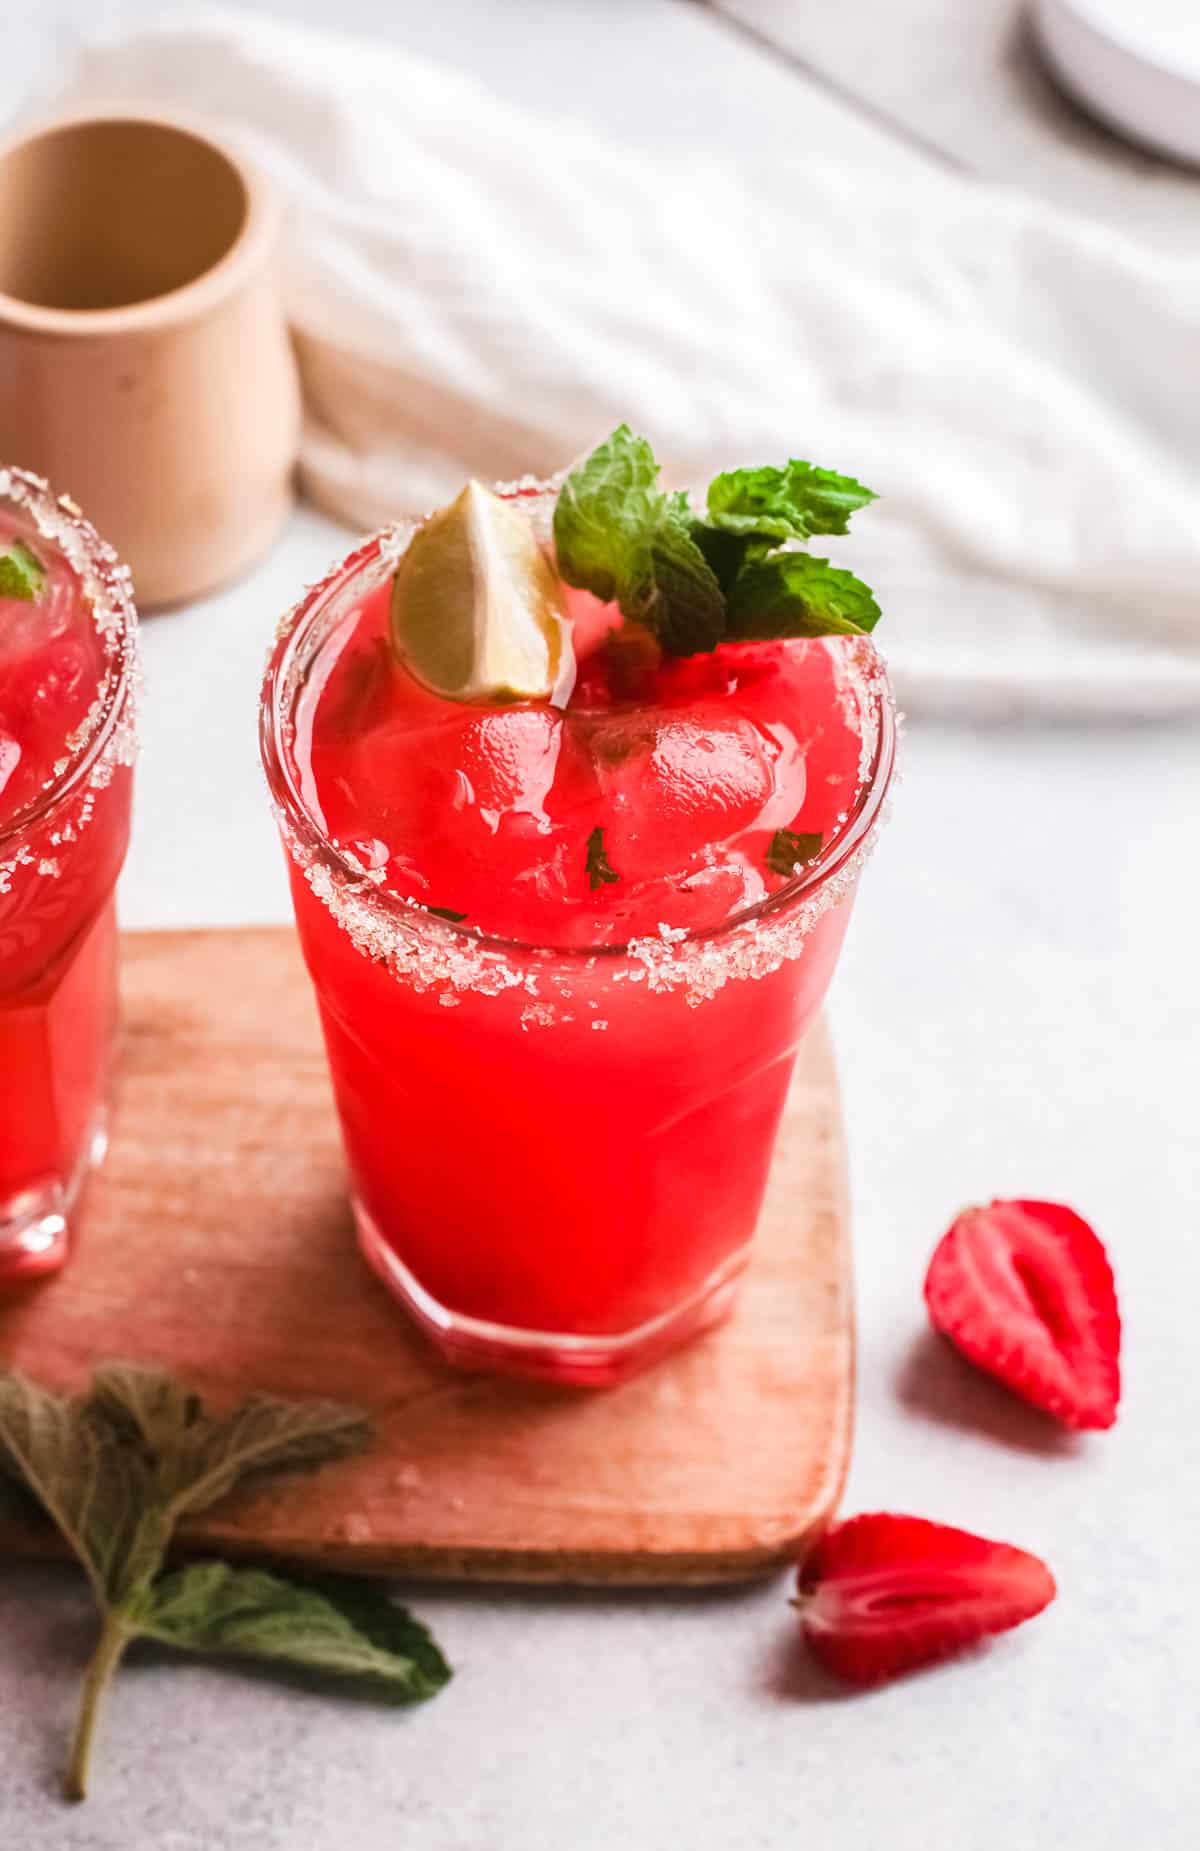 Strawberry and tequila cocktails on a wooden board.